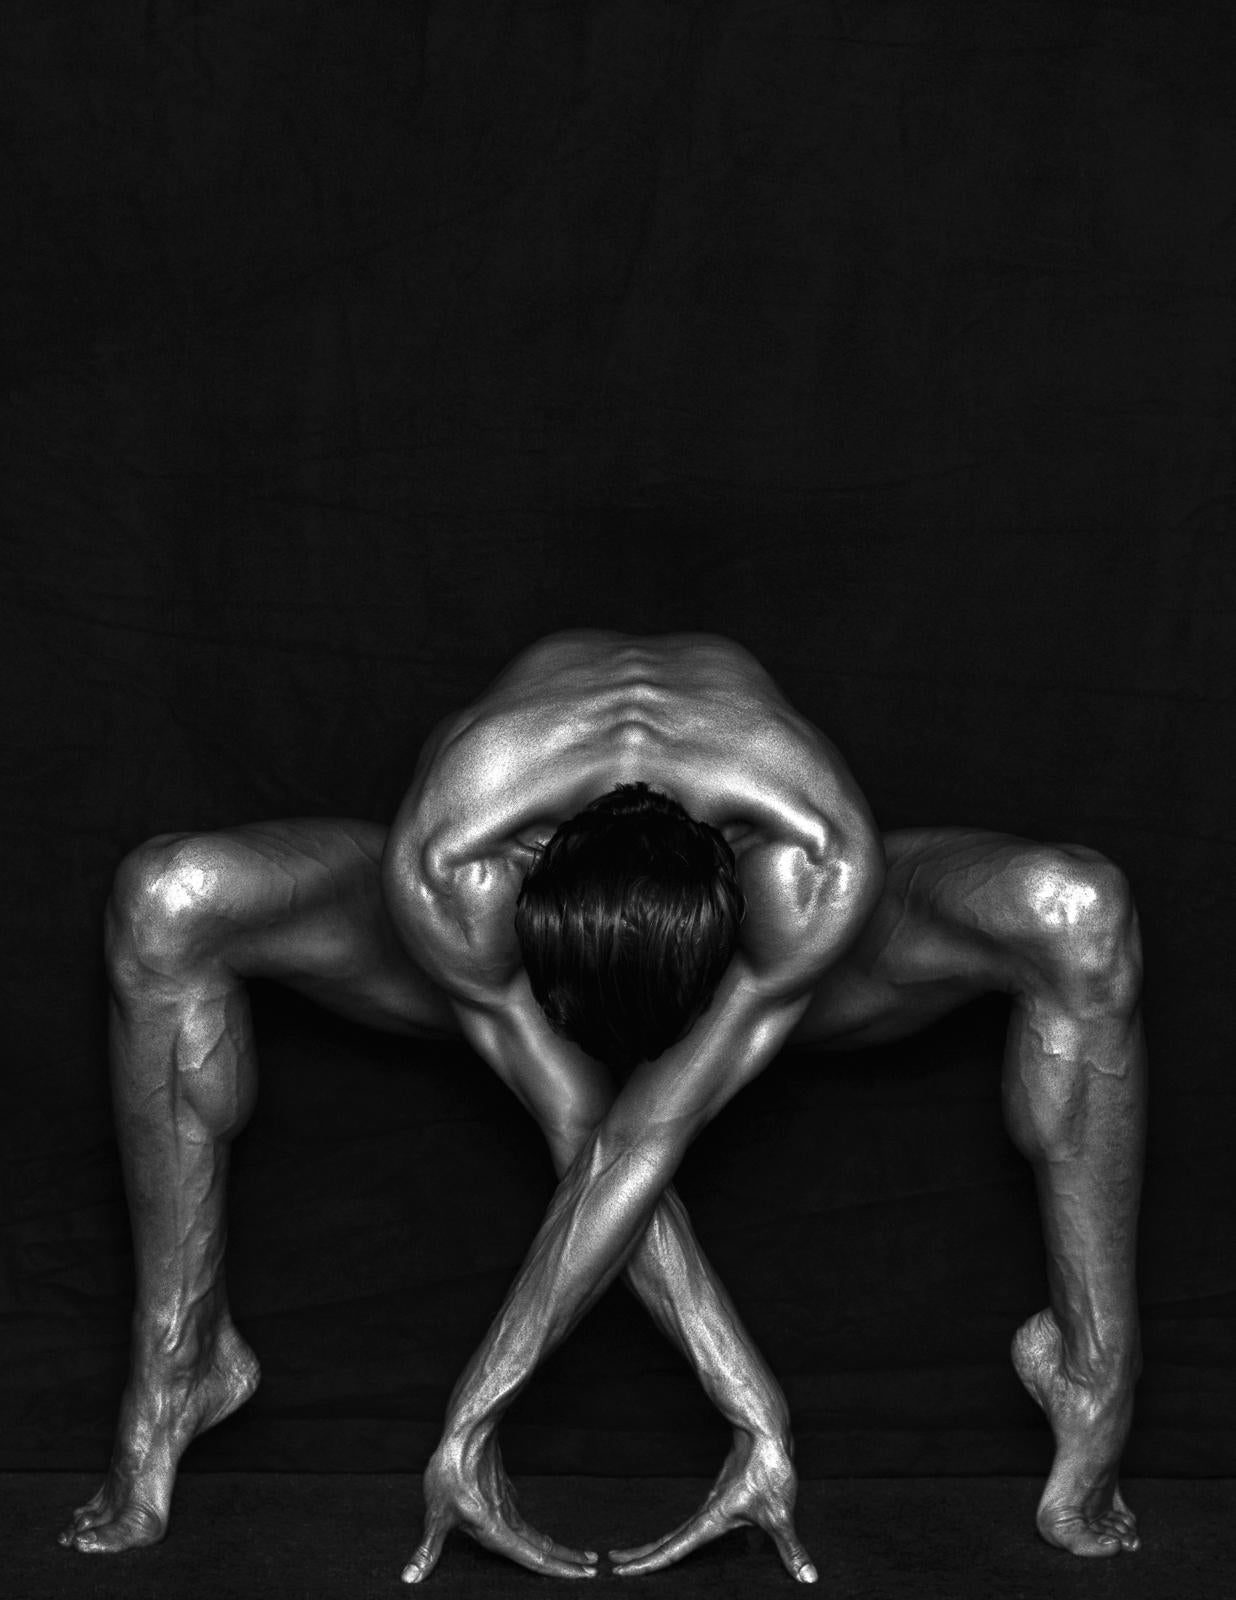 110.01.98, More Typographic Creations series (Male Dancer Photograph)